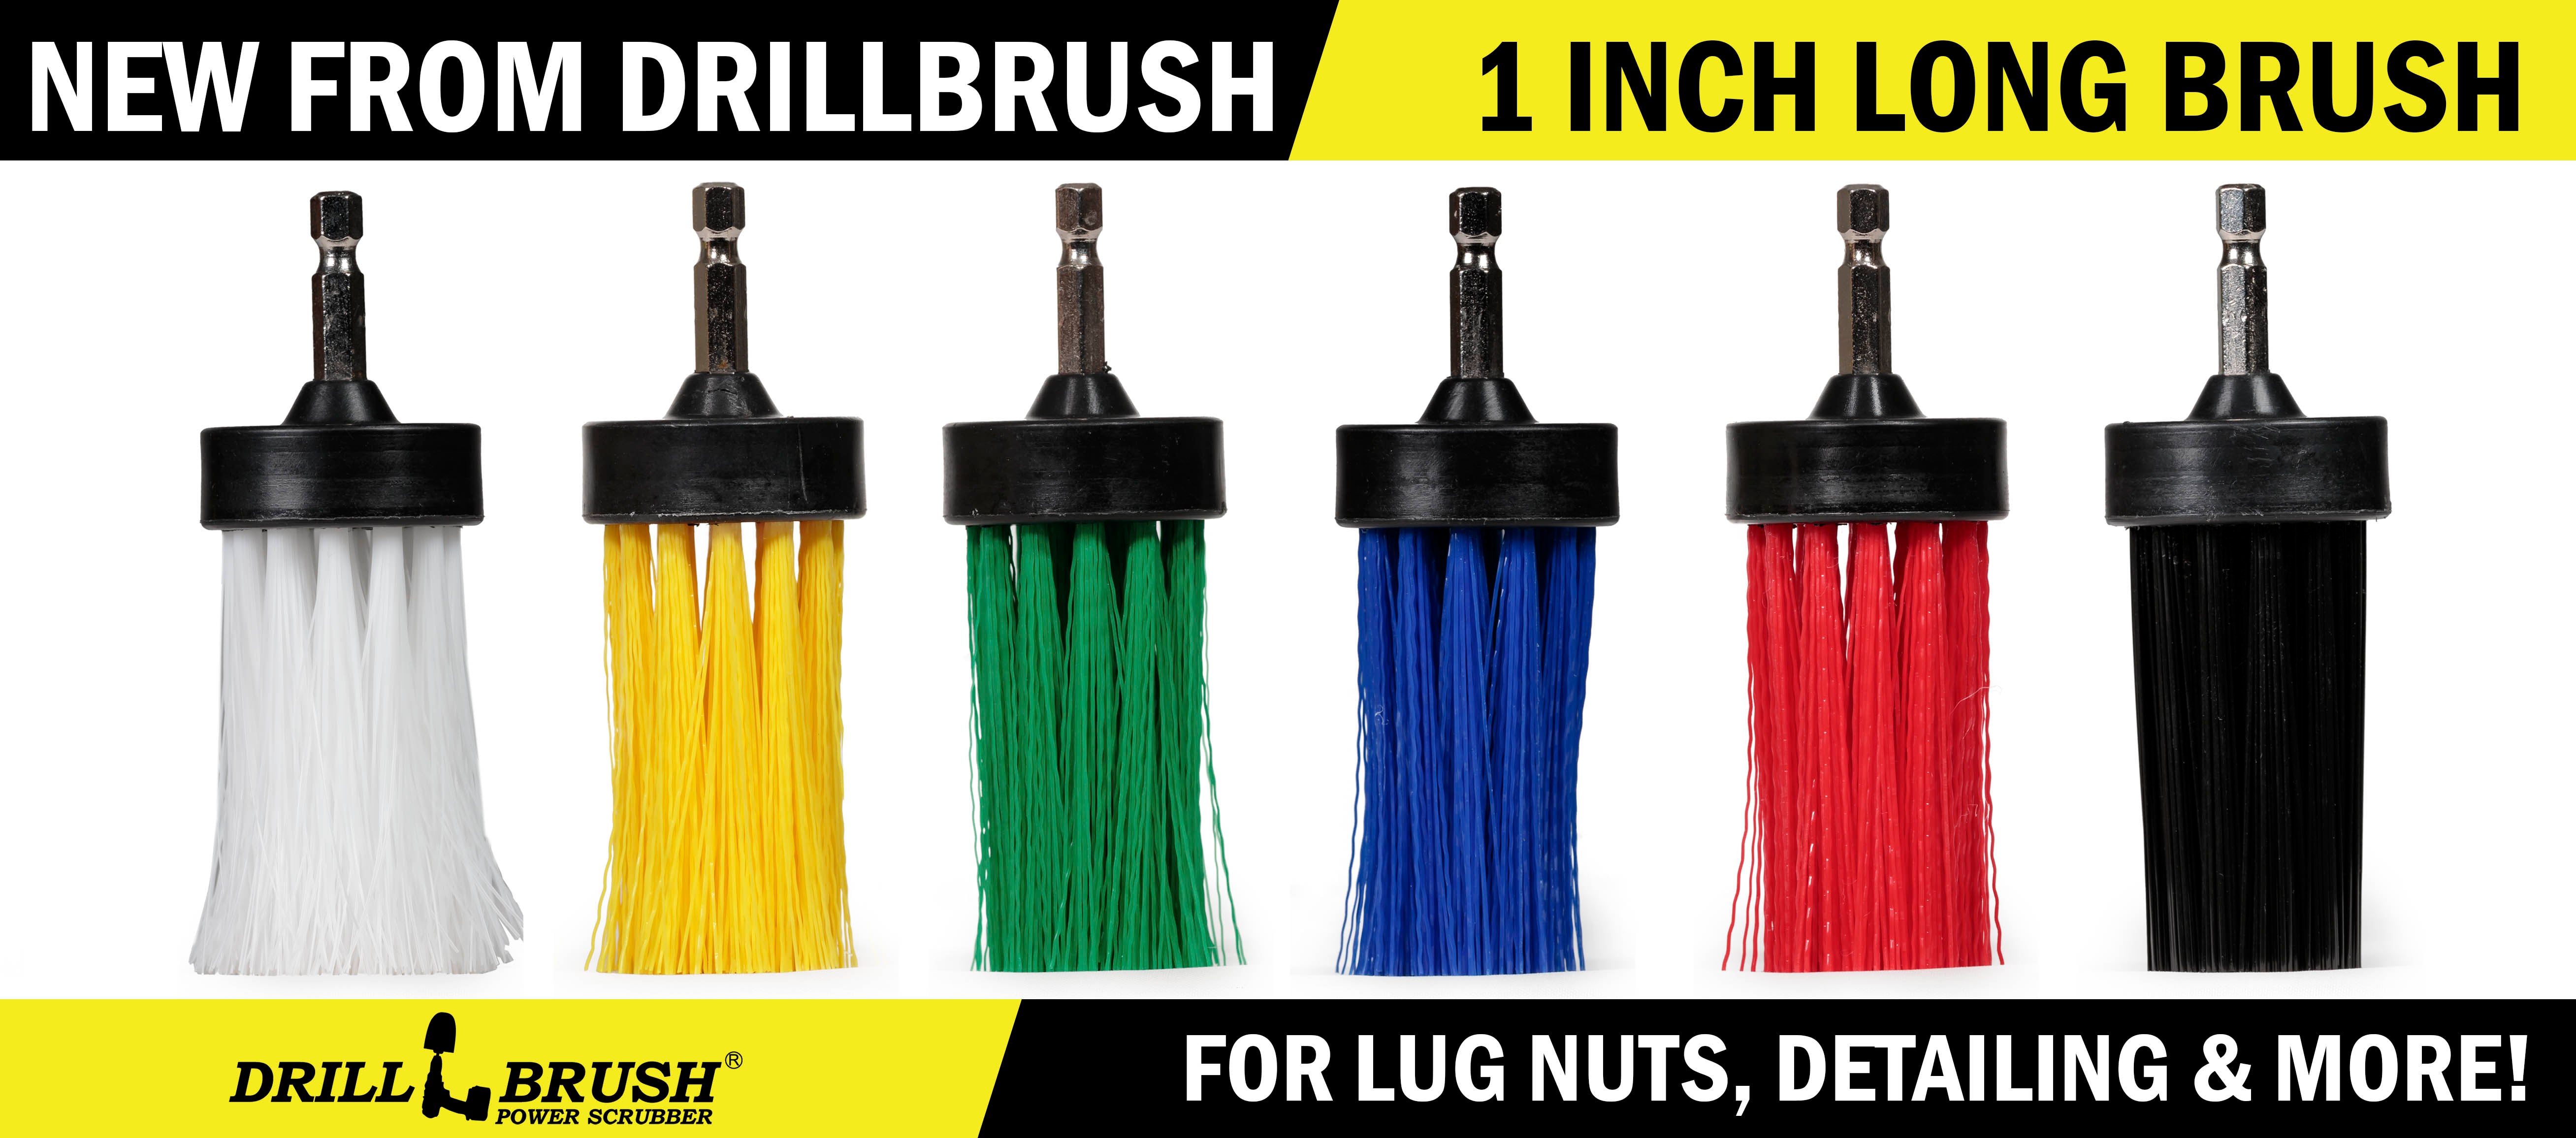 This New Drillbrush Product is the Answer for Scrubbing Lug Nuts